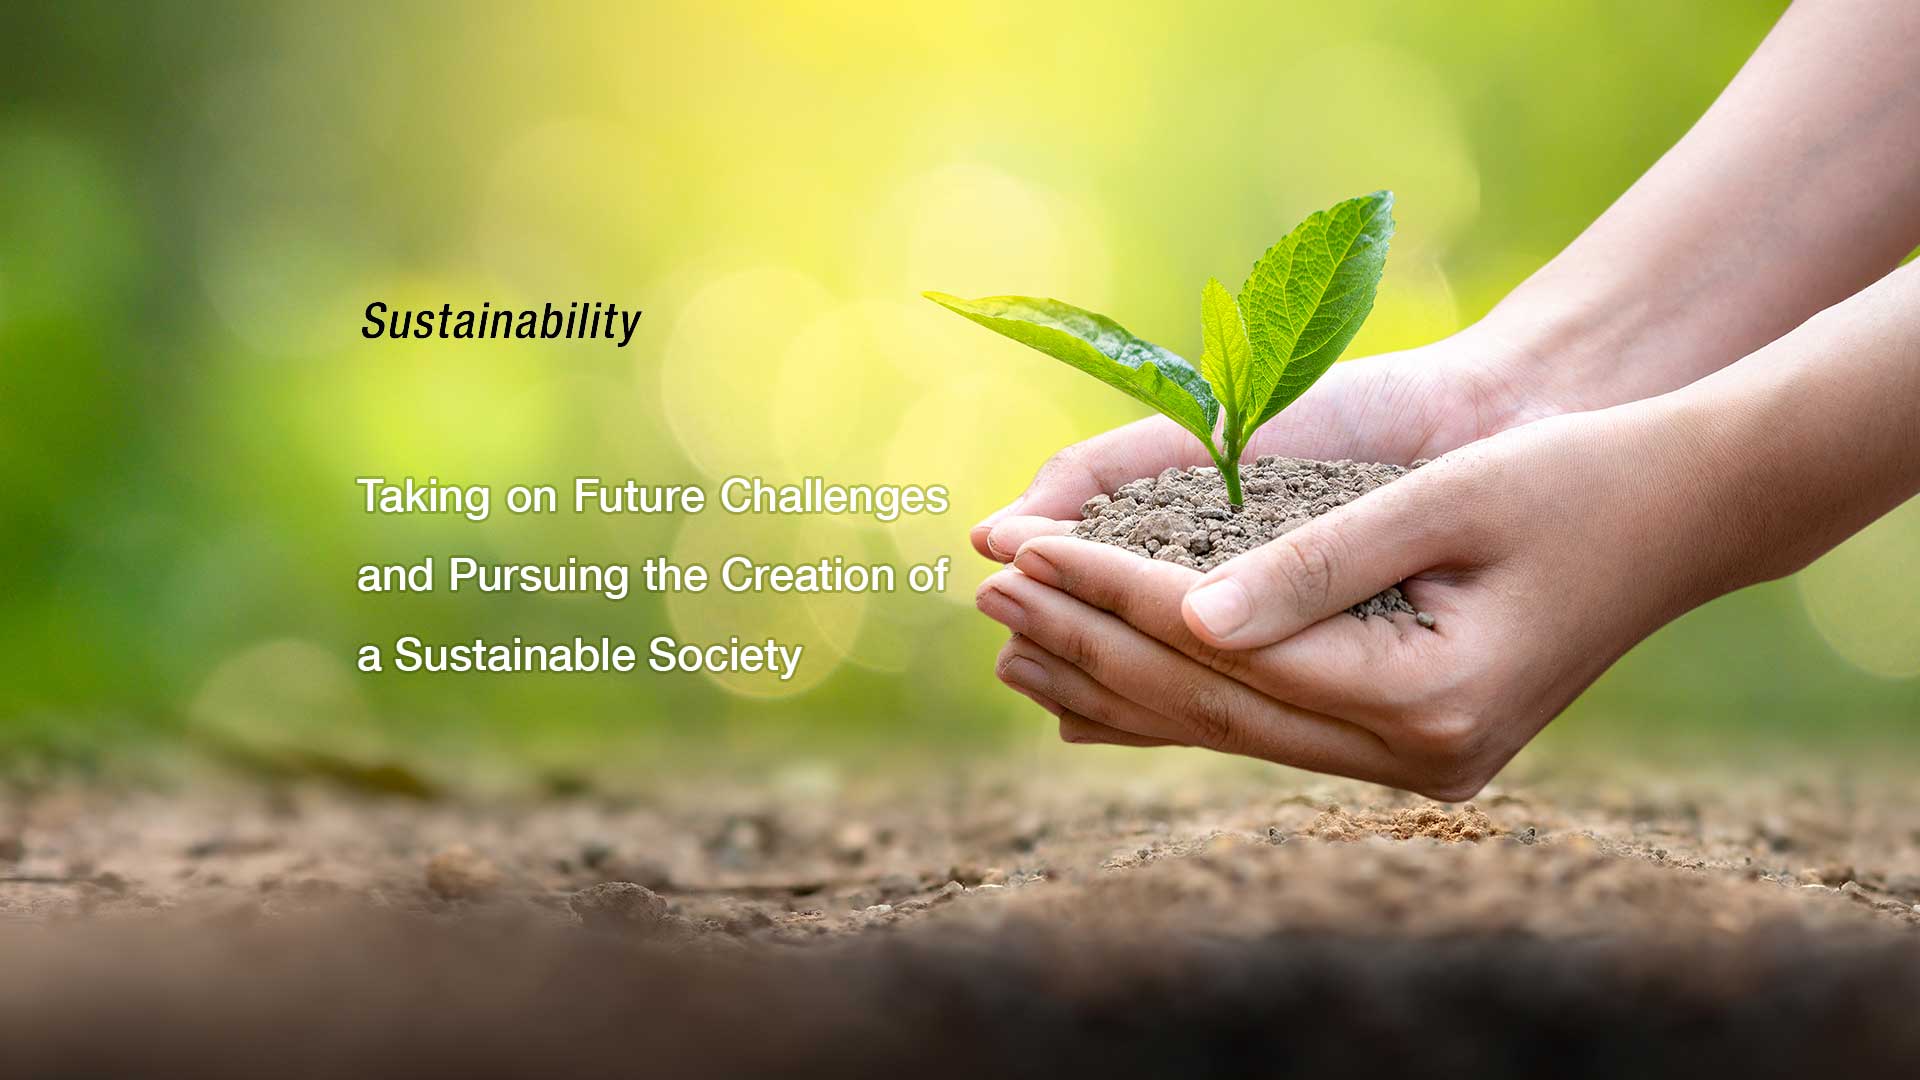 Taking on Future Challenges and Pursuing the Creation of a Sustainable Society